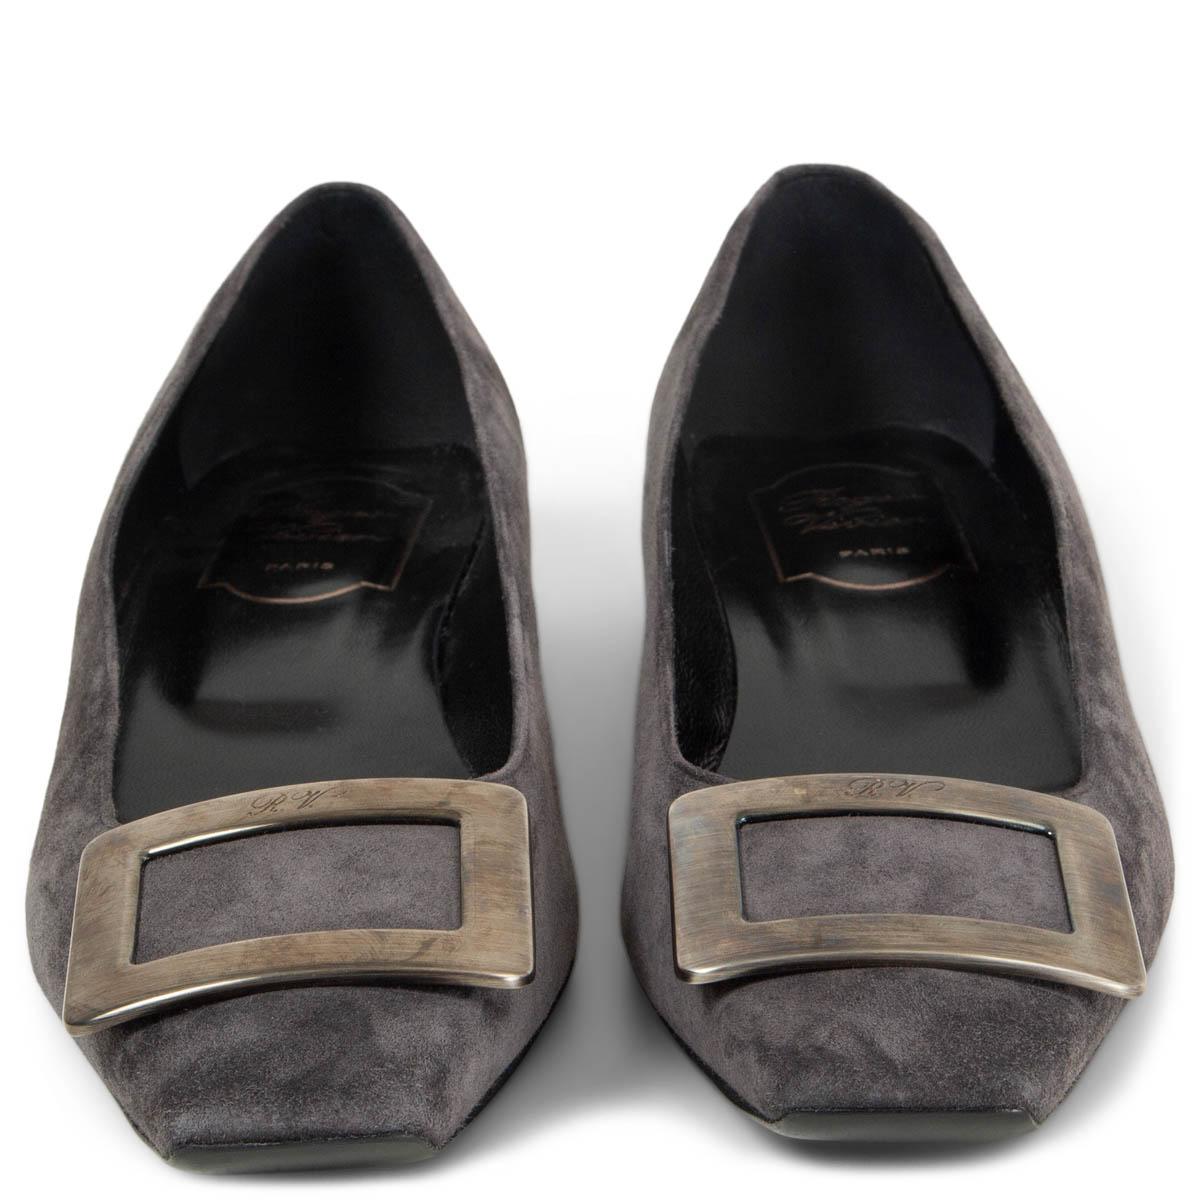 100% authentic Roger Vivier 'Belle Vivier' ballet flats in gray suede leather (100%). Features the iconic trompette heel and the signature buckle. Has been worn once and is in excellent condition.

Measurements
Imprinted Size	39
Shoe Size	39
Inside